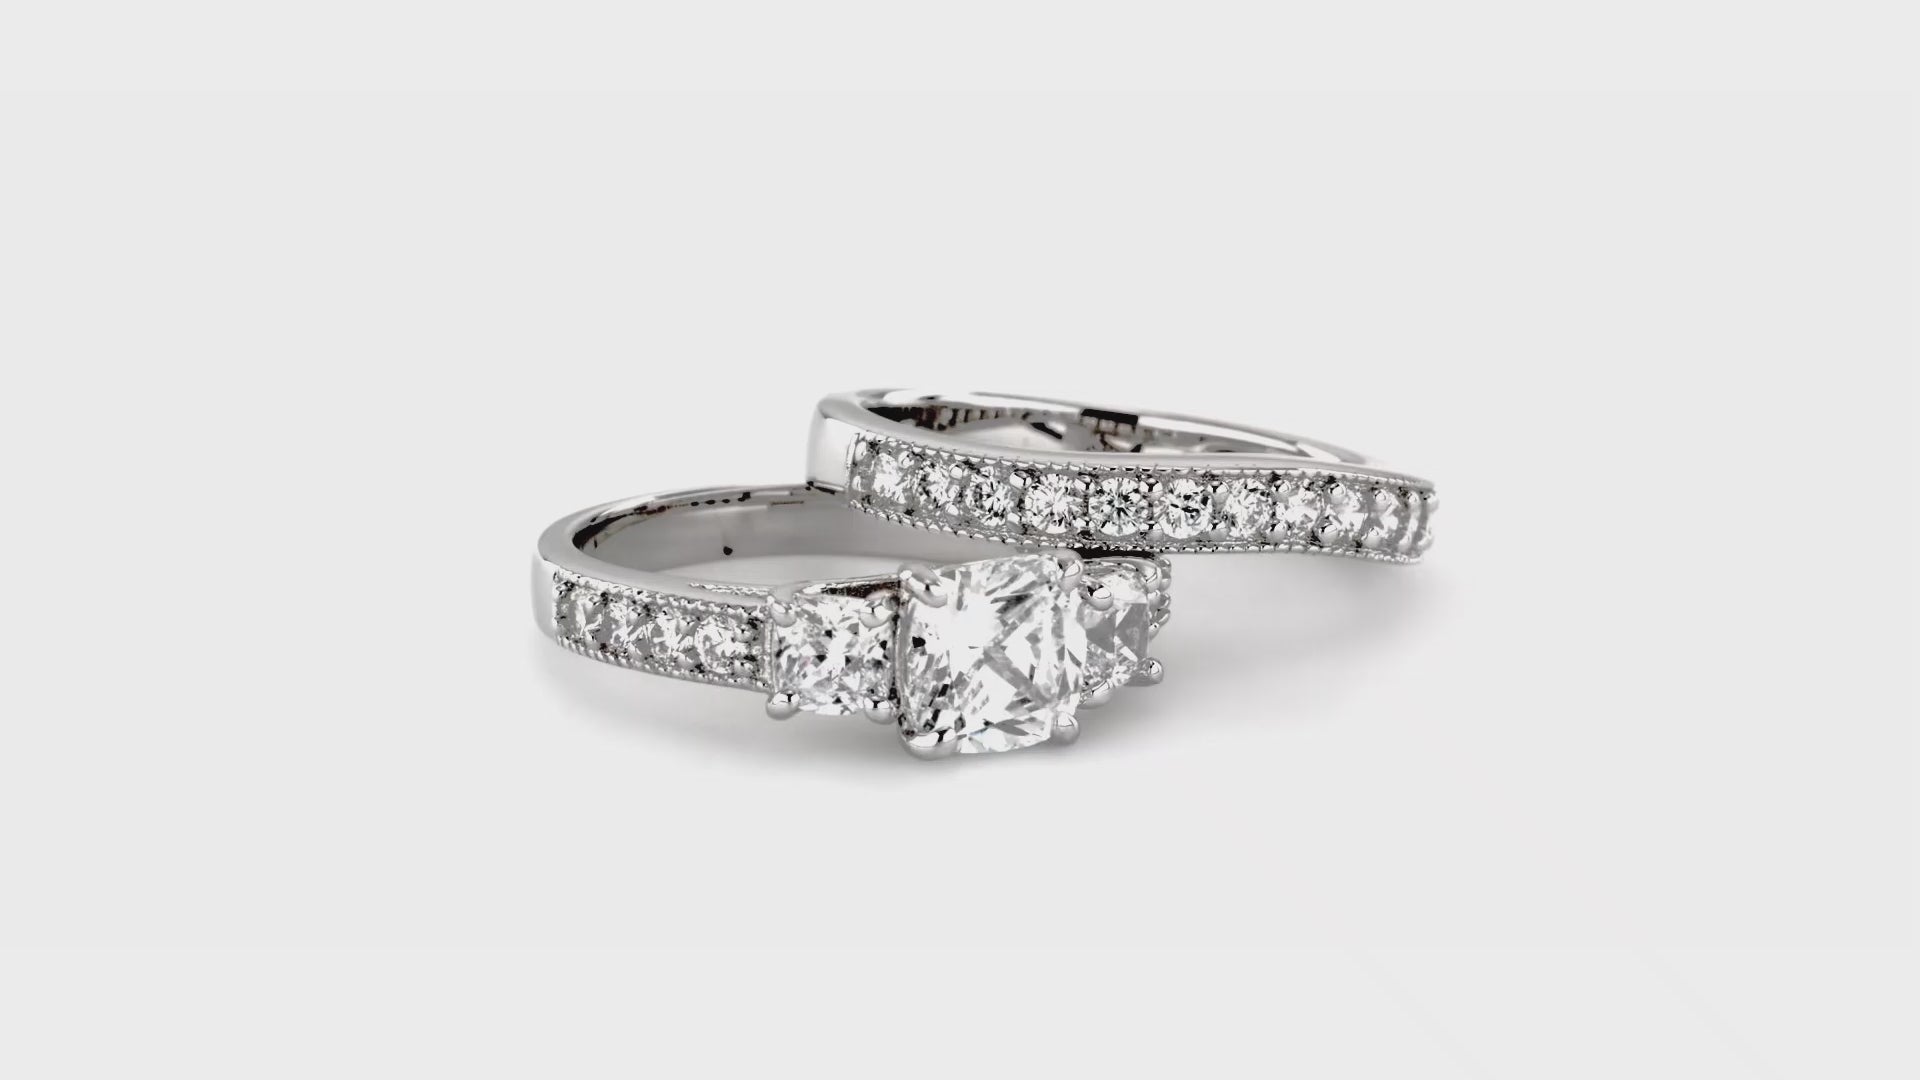 Video Contains 3-Stone Cushion CZ Ring Set in Sterling Silver. Style Number VR314-01